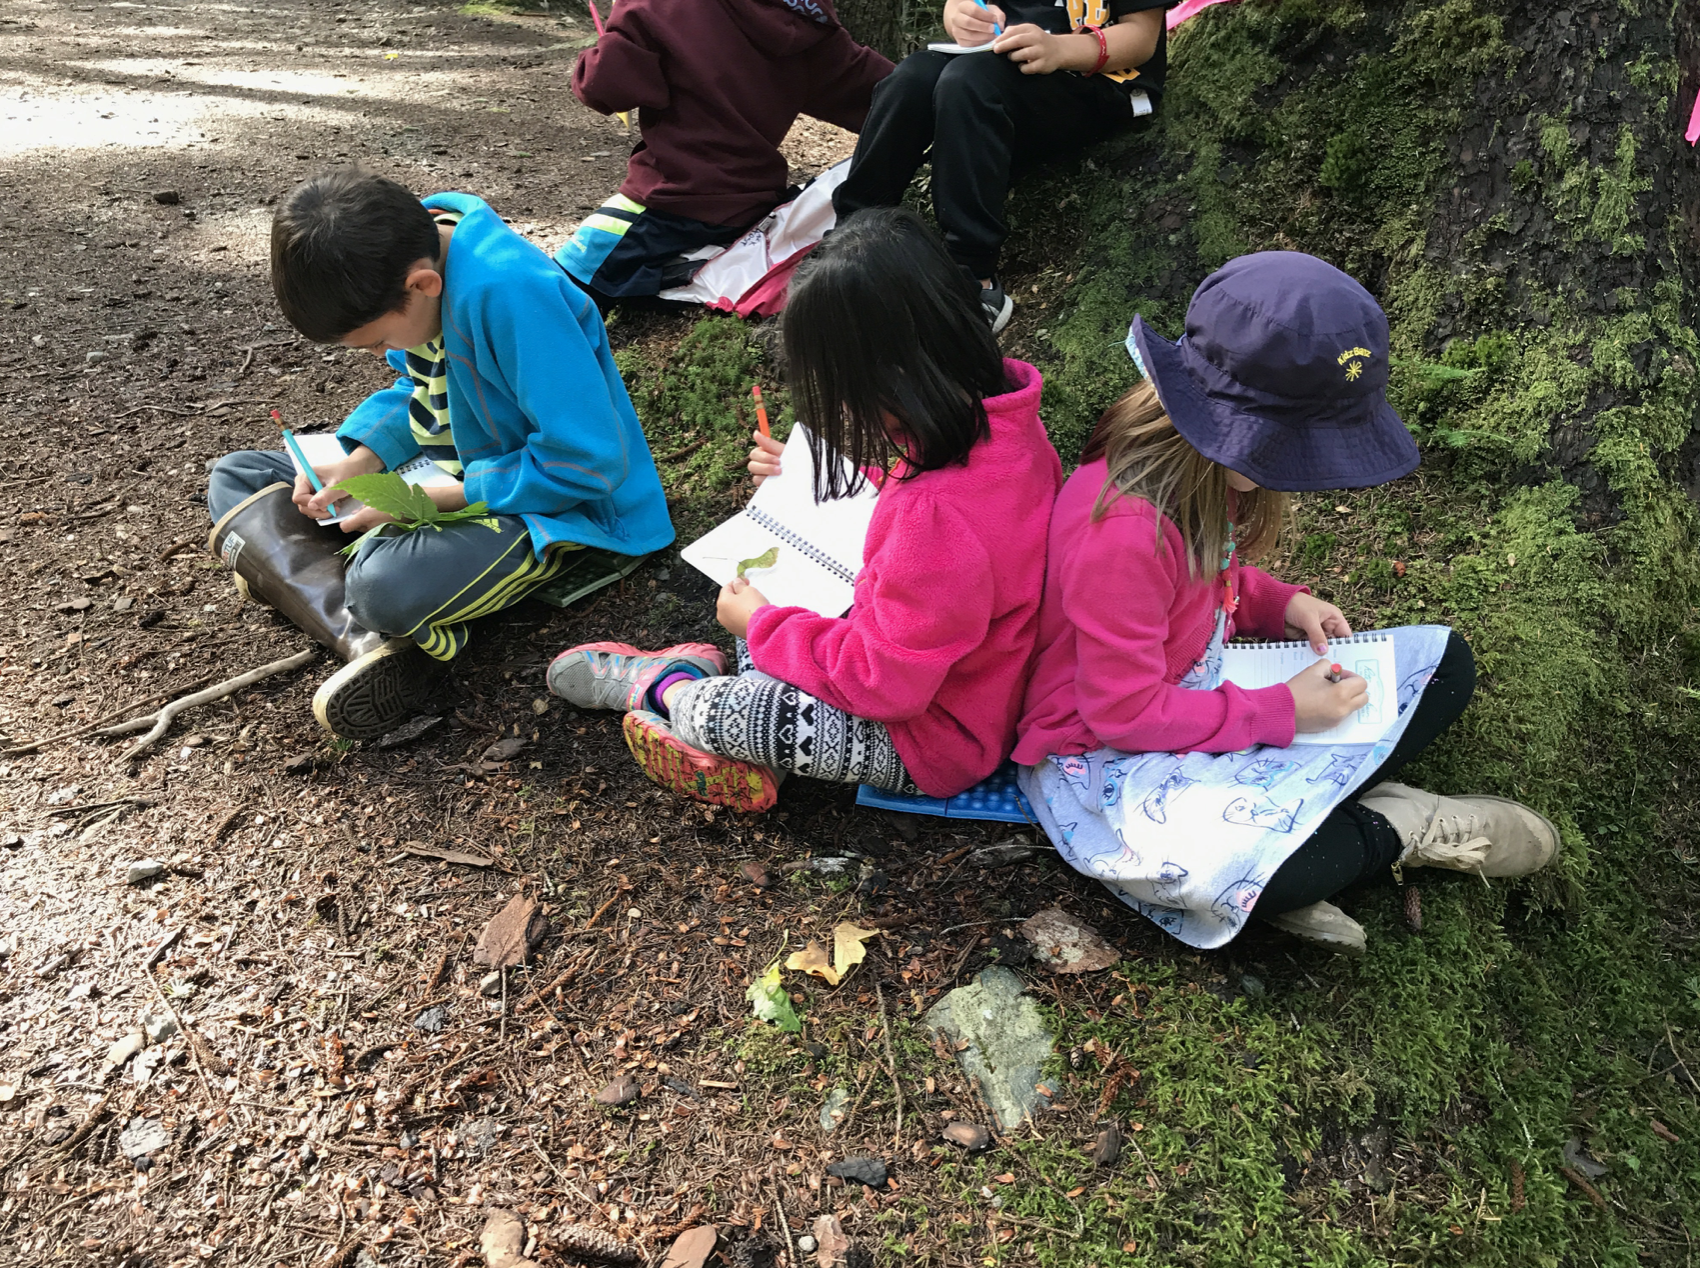 Elementary students making life science observations in notebooks, outside in nature.